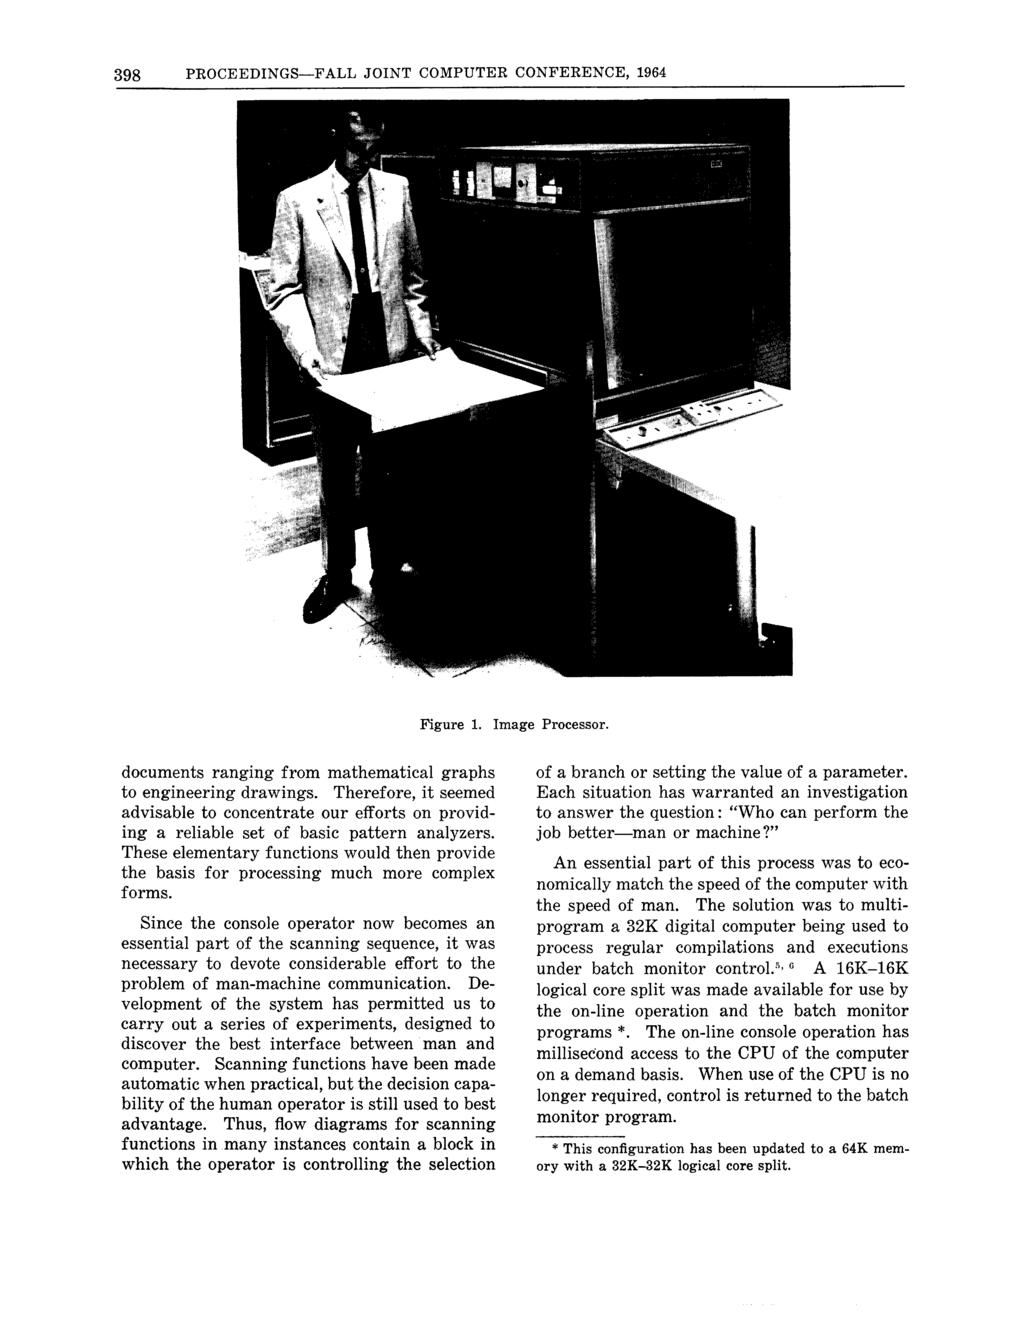 398 PROCEEDINGS-FALL JOINT COMPUTER CONFERENCE, 1964 Figure 1. Image Processor. documents ranging from mathematical graphs to engineering drawings.